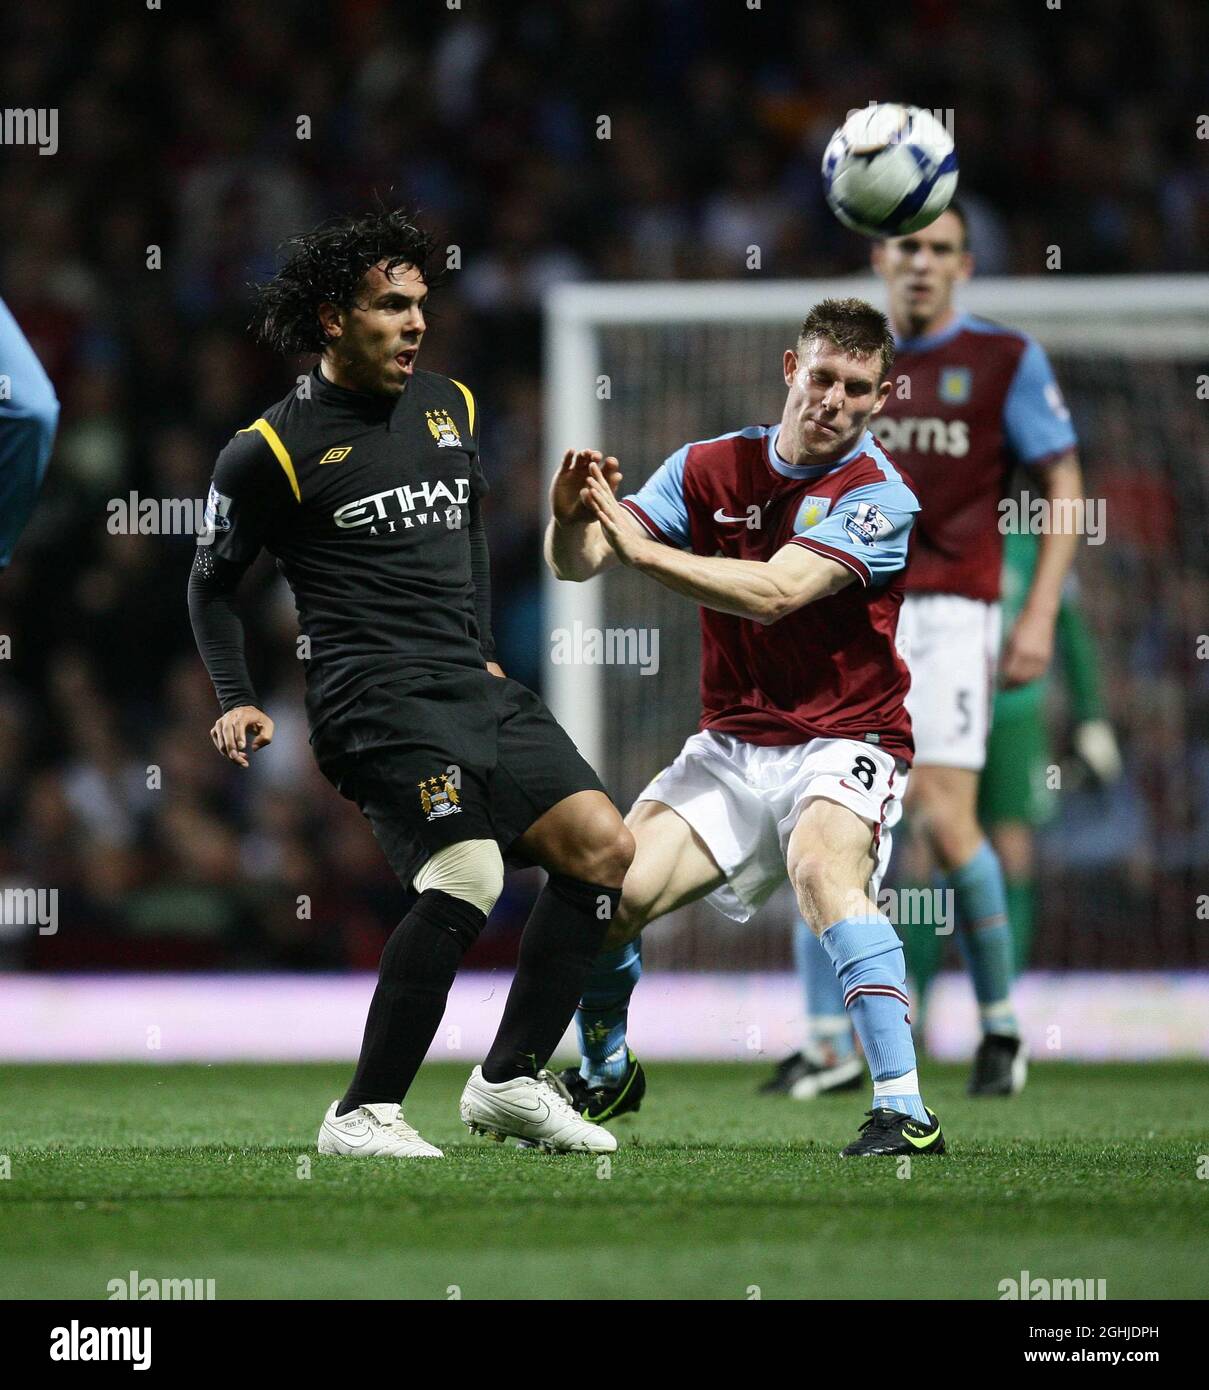 James Milner of Aston Villa (r) competes with Carlos Tevez during the Barclays Premier League match between Aston Villa v Manchester City at Villa Park in Birmingham. Stock Photo